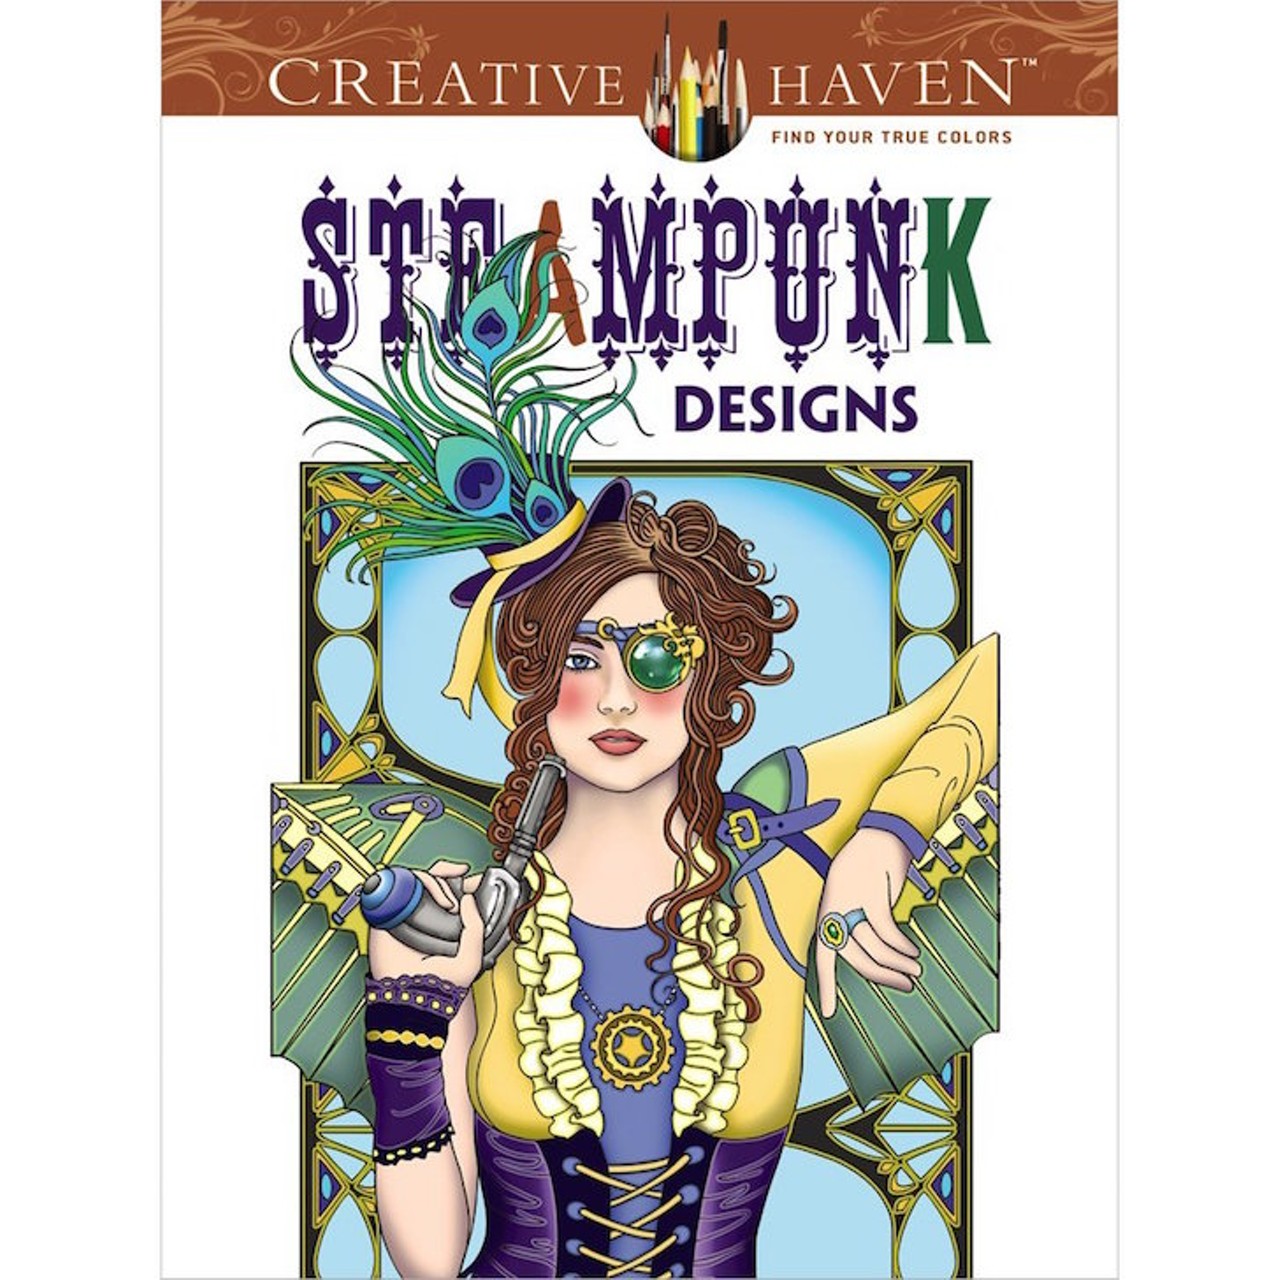  Steampunk Designs Coloring Book
So many goggles!
Buy it at amazon.com 